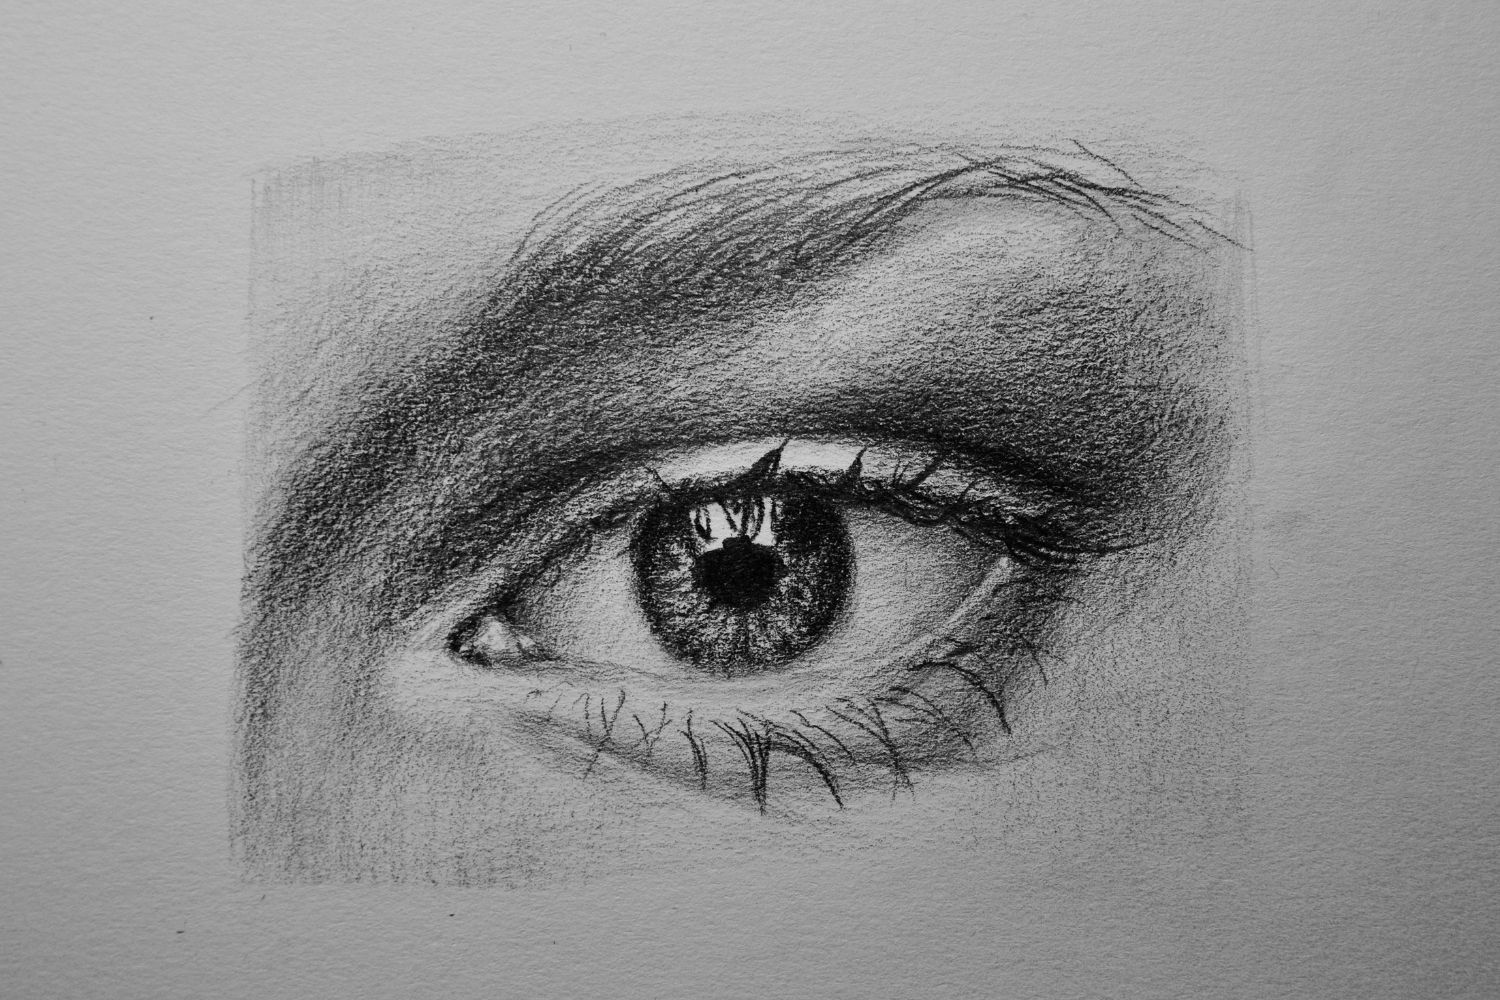 Learn How To Draw A Realistic Eye Using Pencil | Skill Success